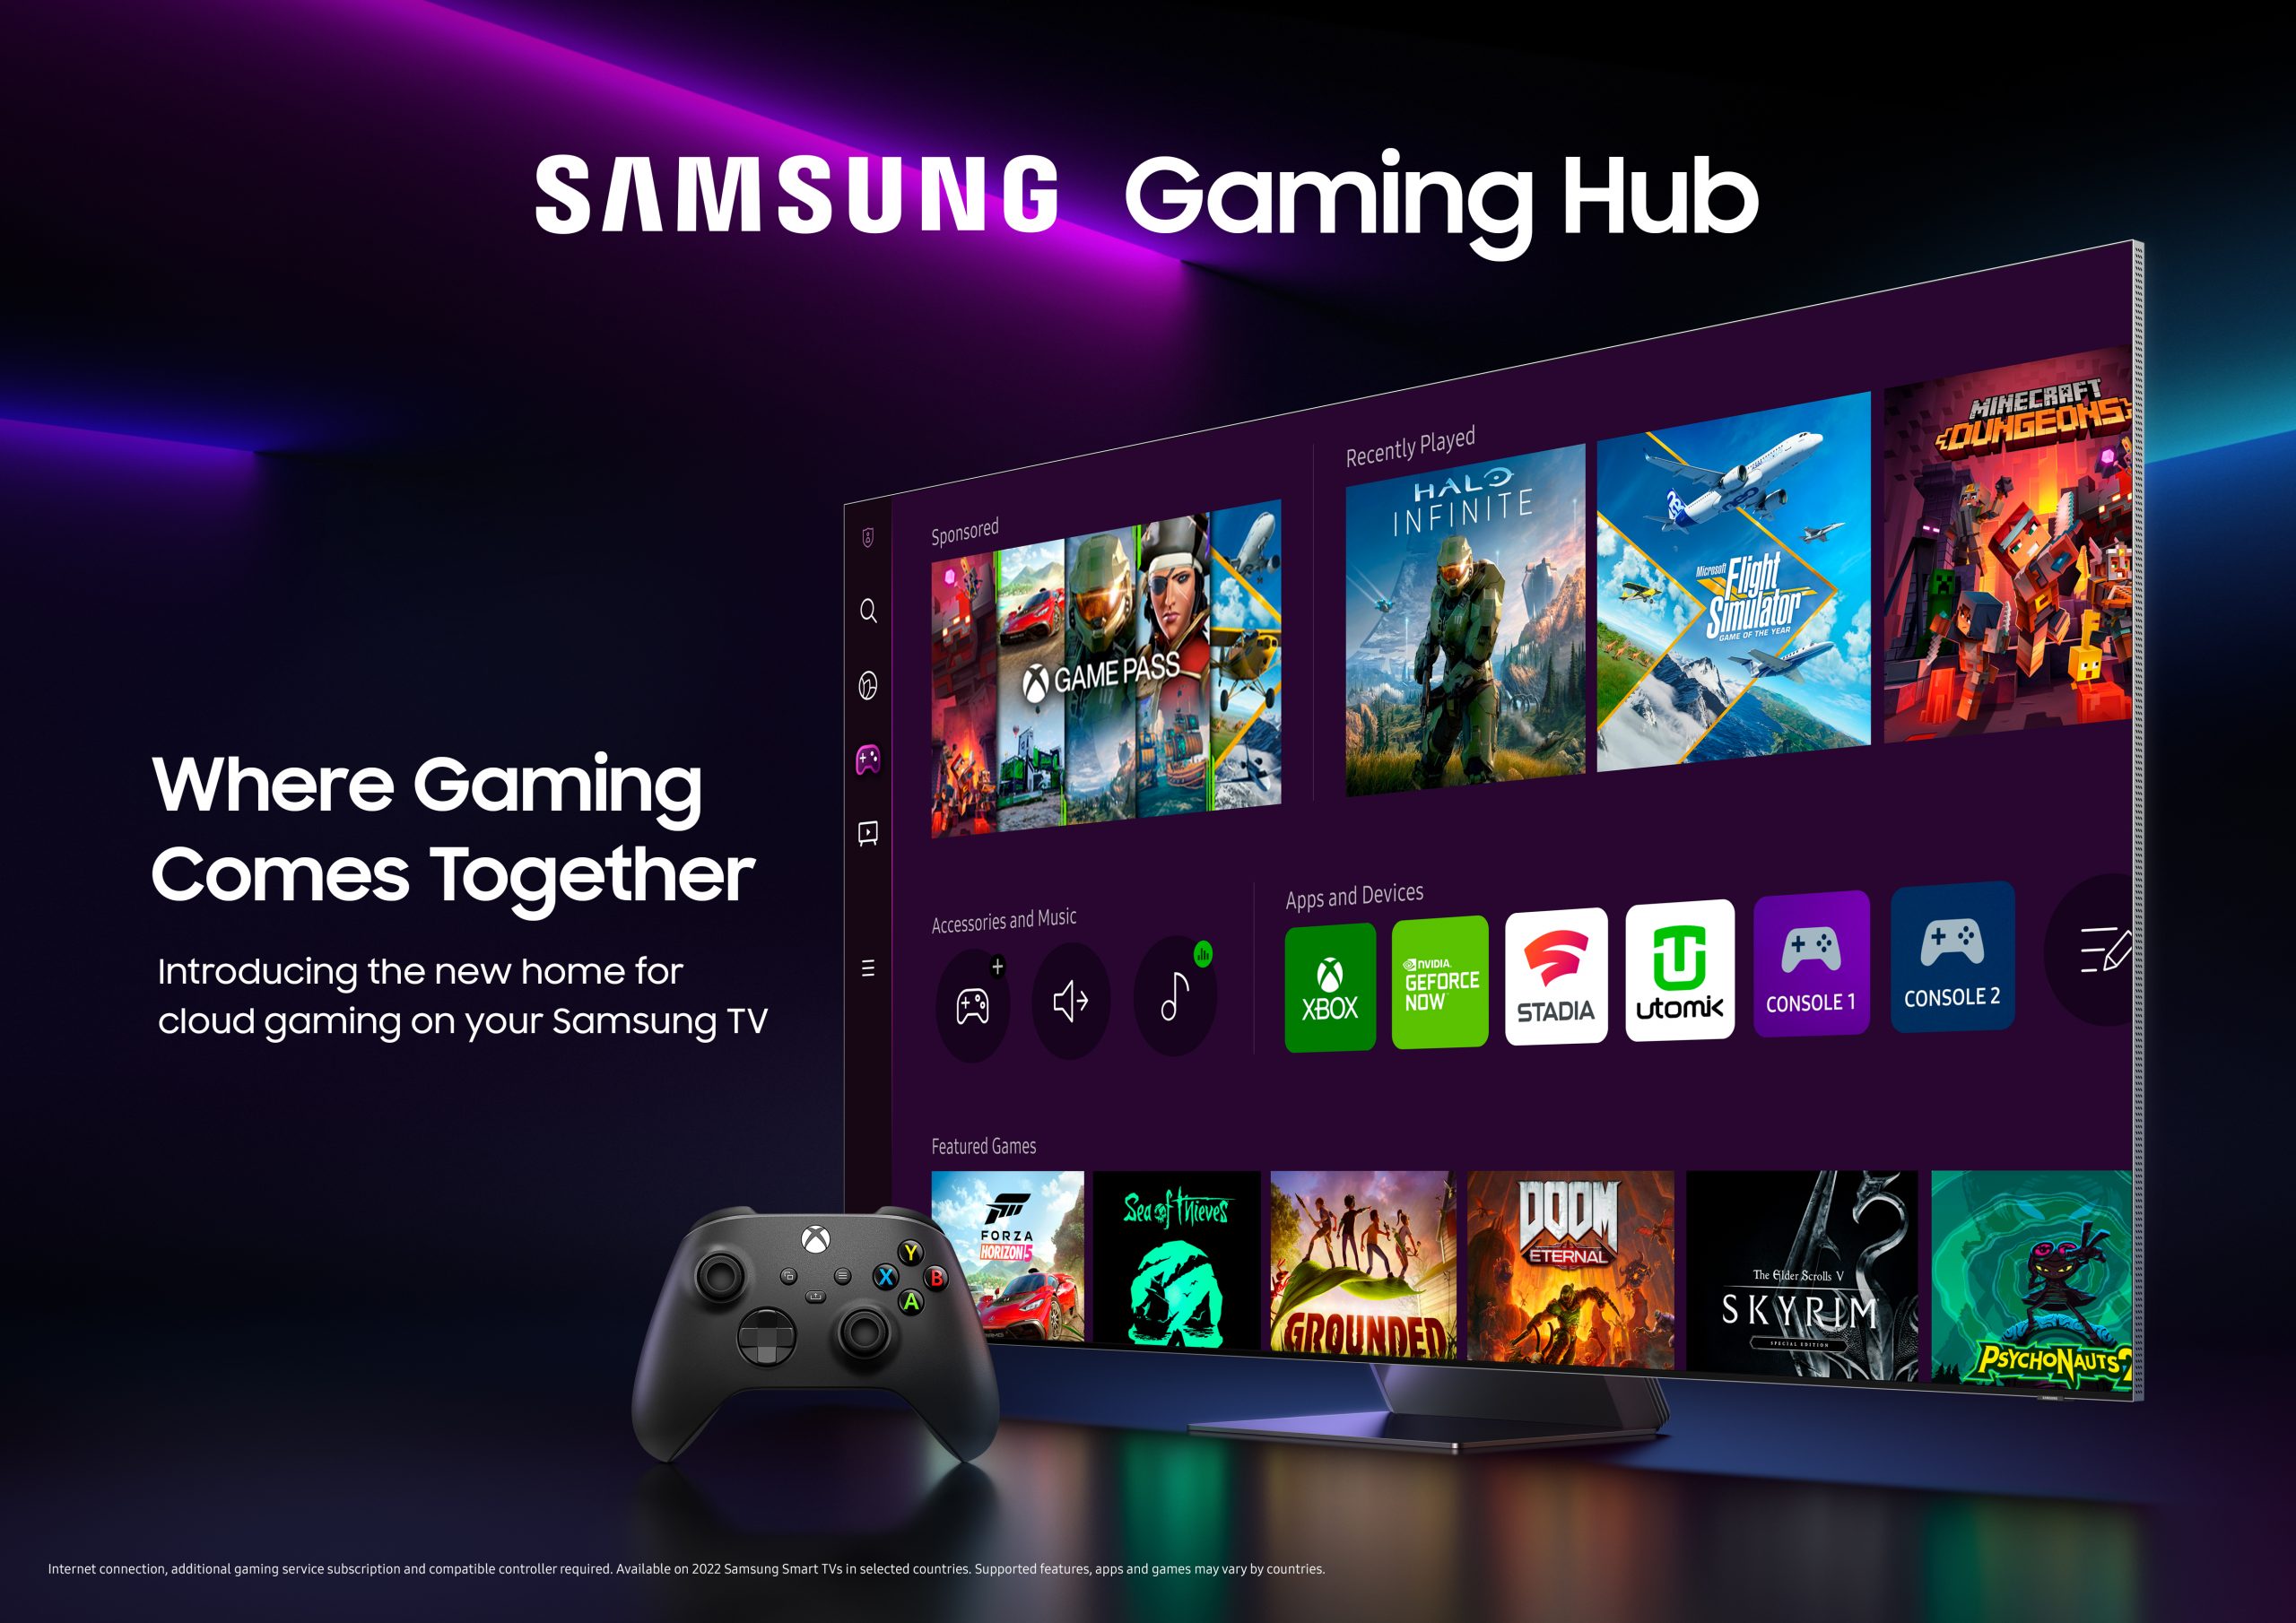 Samsung Gaming Hub, an AllNew Game Streaming Discovery Platform, Now